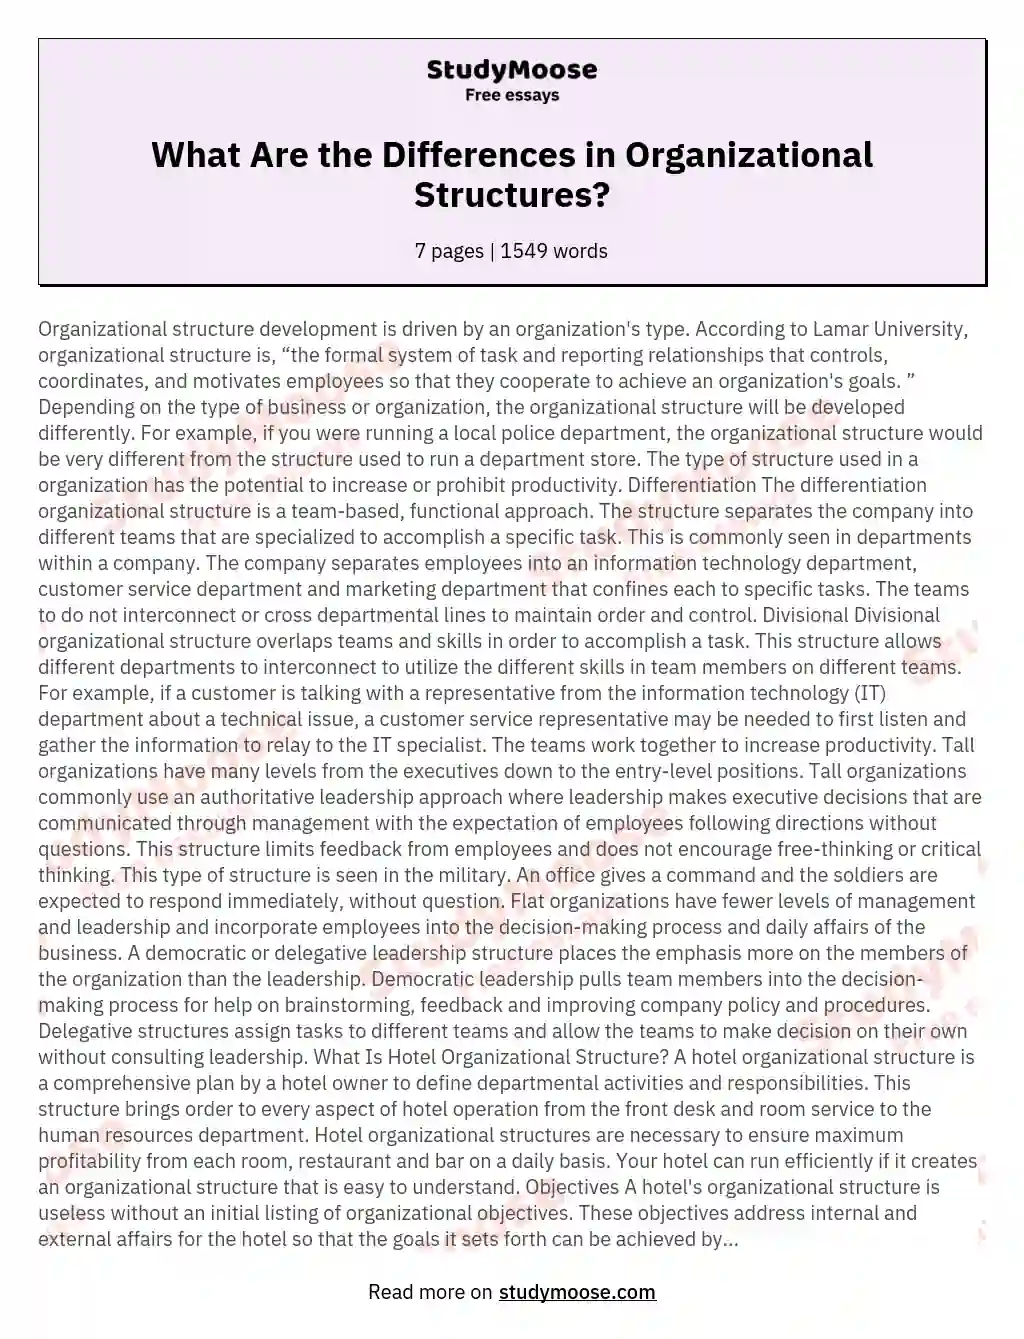 What Are the Differences in Organizational Structures? essay